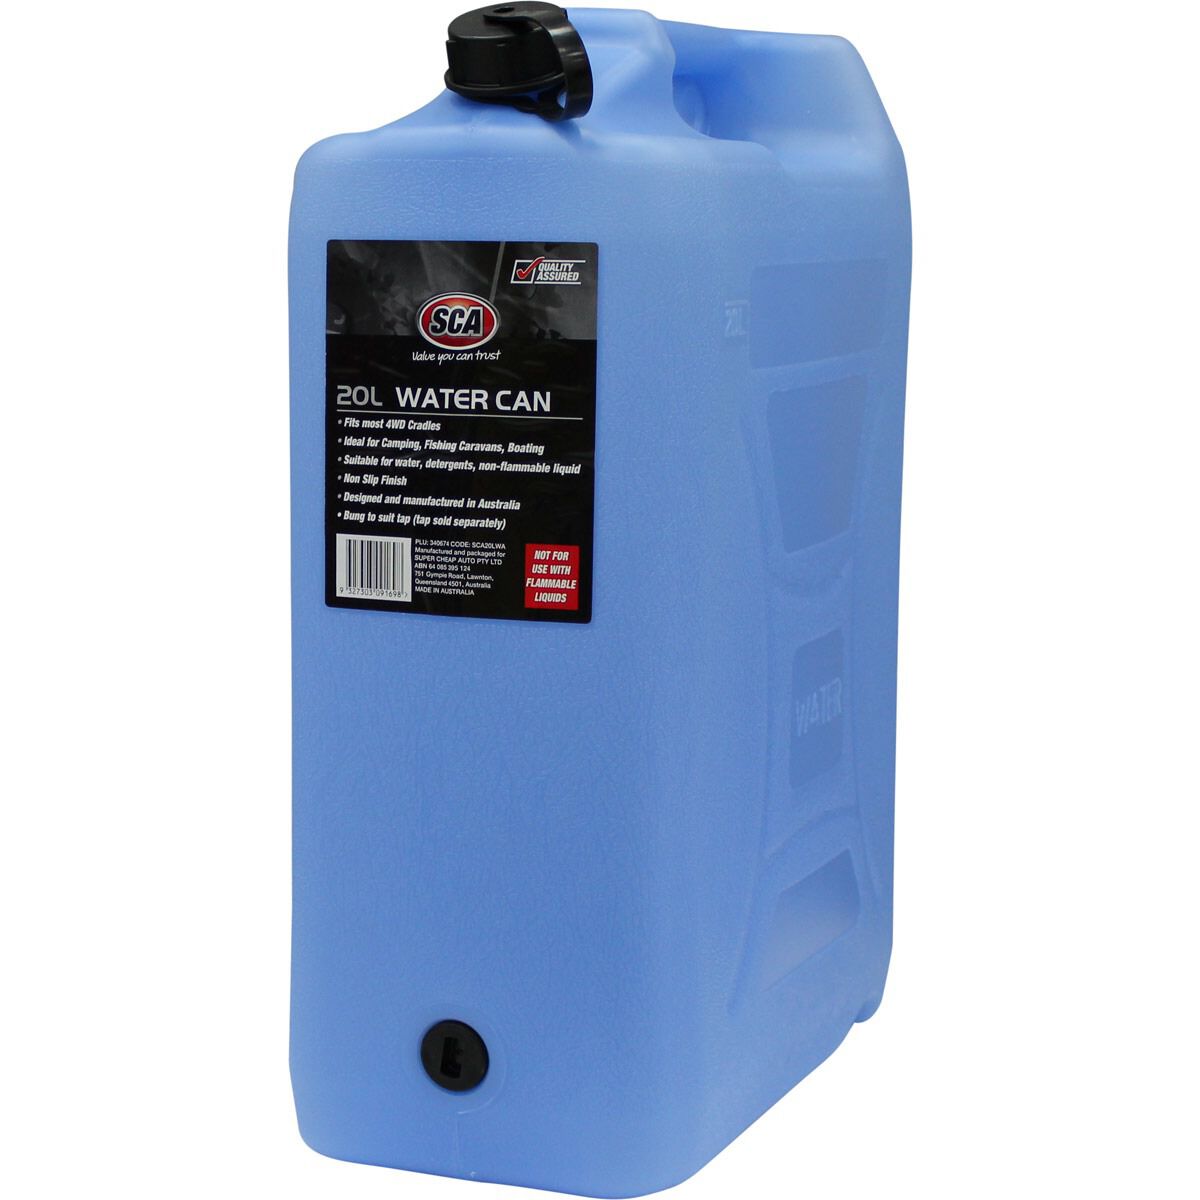 10 Litres Cartec 2911014 Water Can 